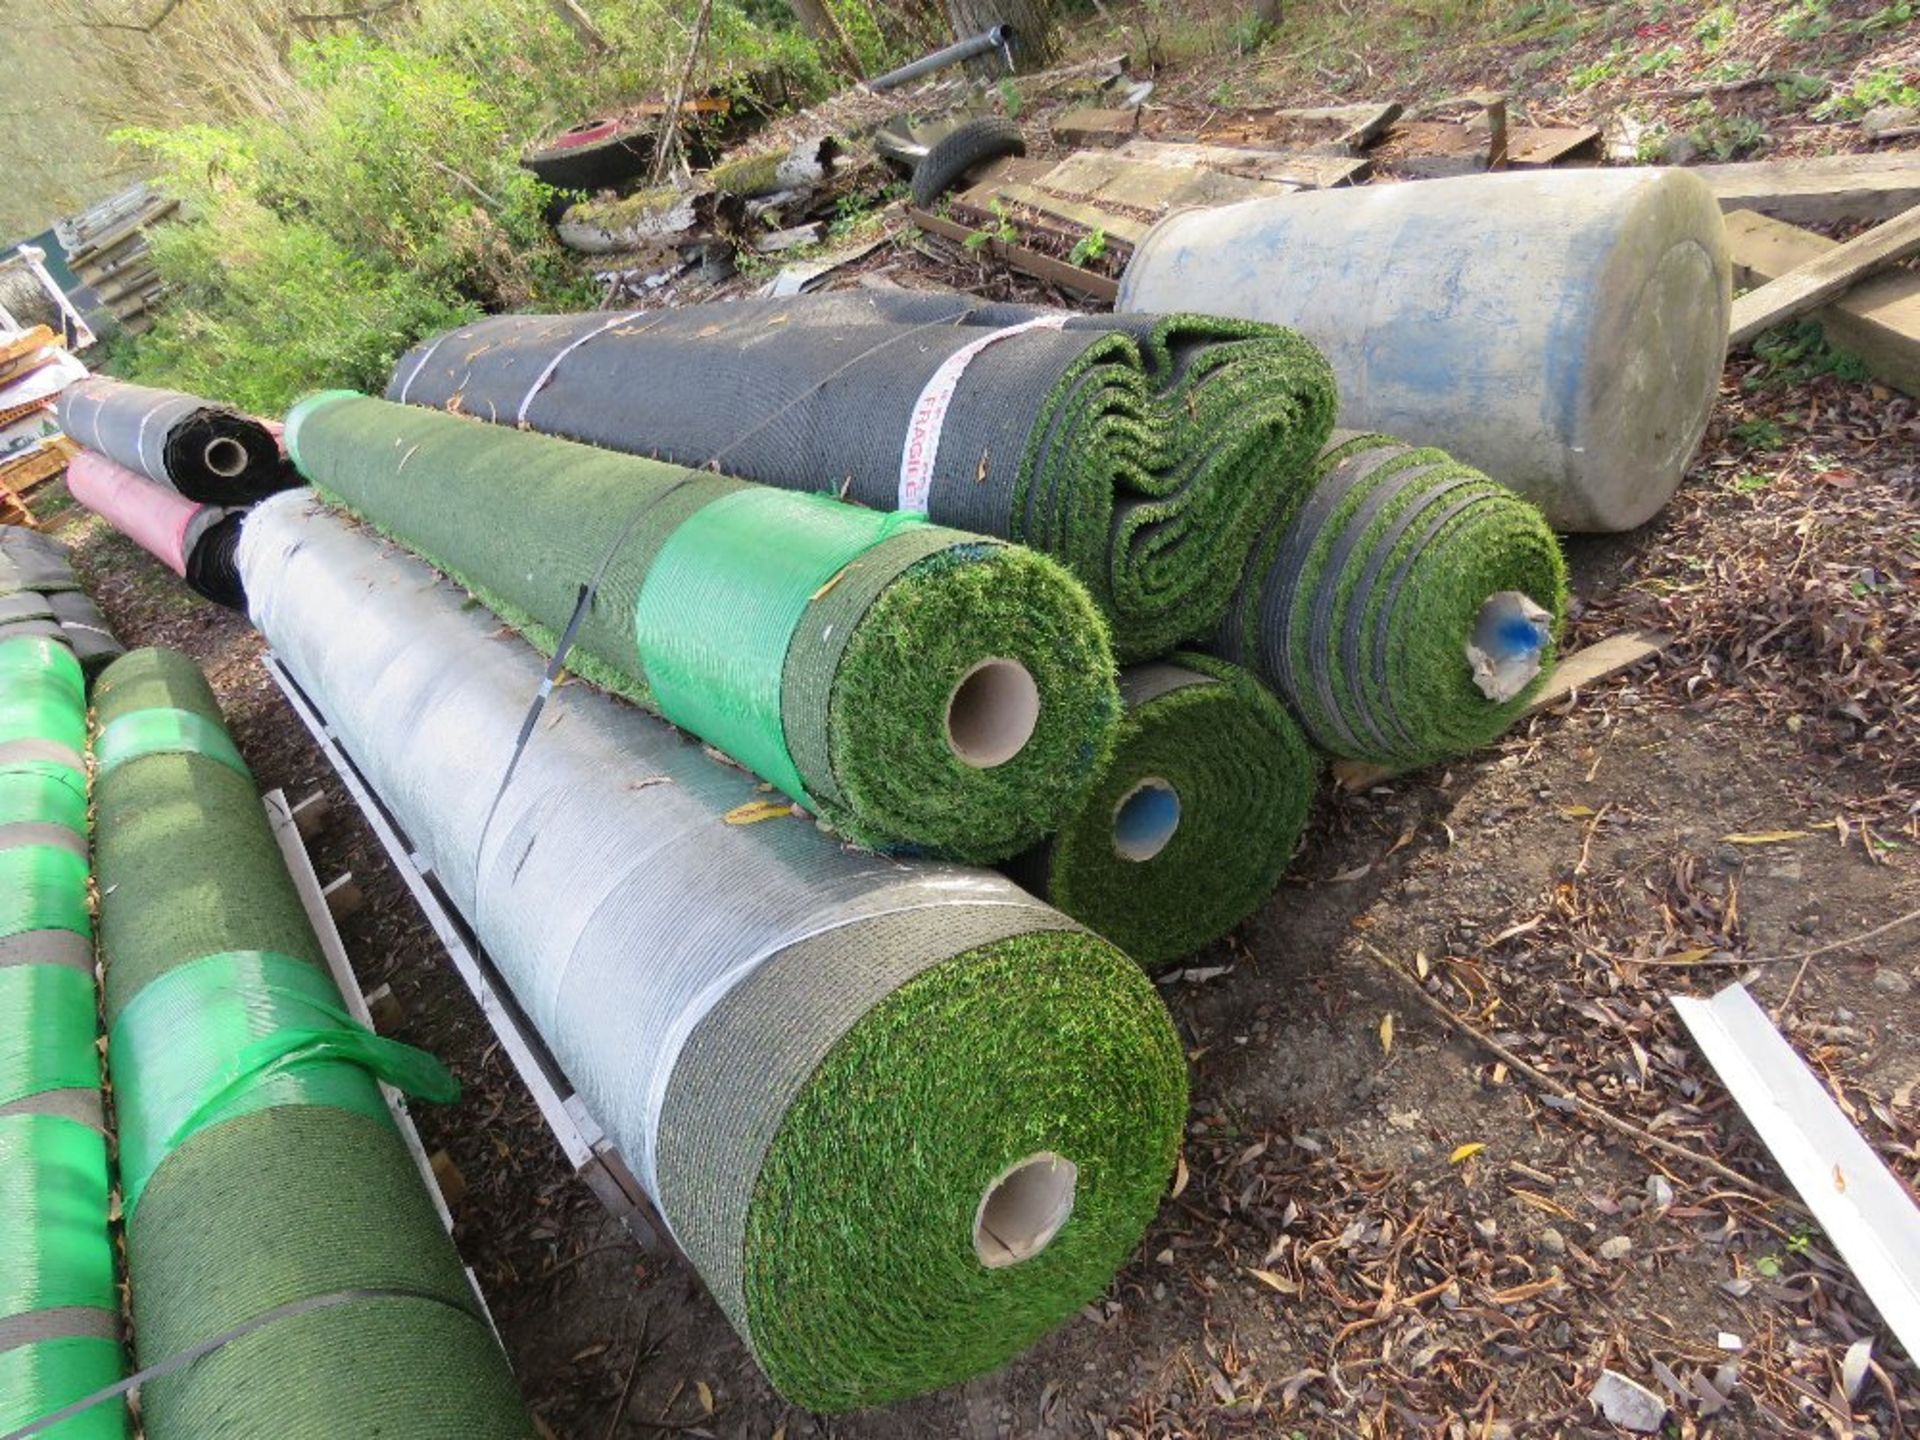 5 X ROLLS OF QUALITY ASTRO TURF FAKE LAWN GRASS, 4METRE WIDTH APPROX, ASSORTED LENGTHS. THIS LOT - Bild 4 aus 4